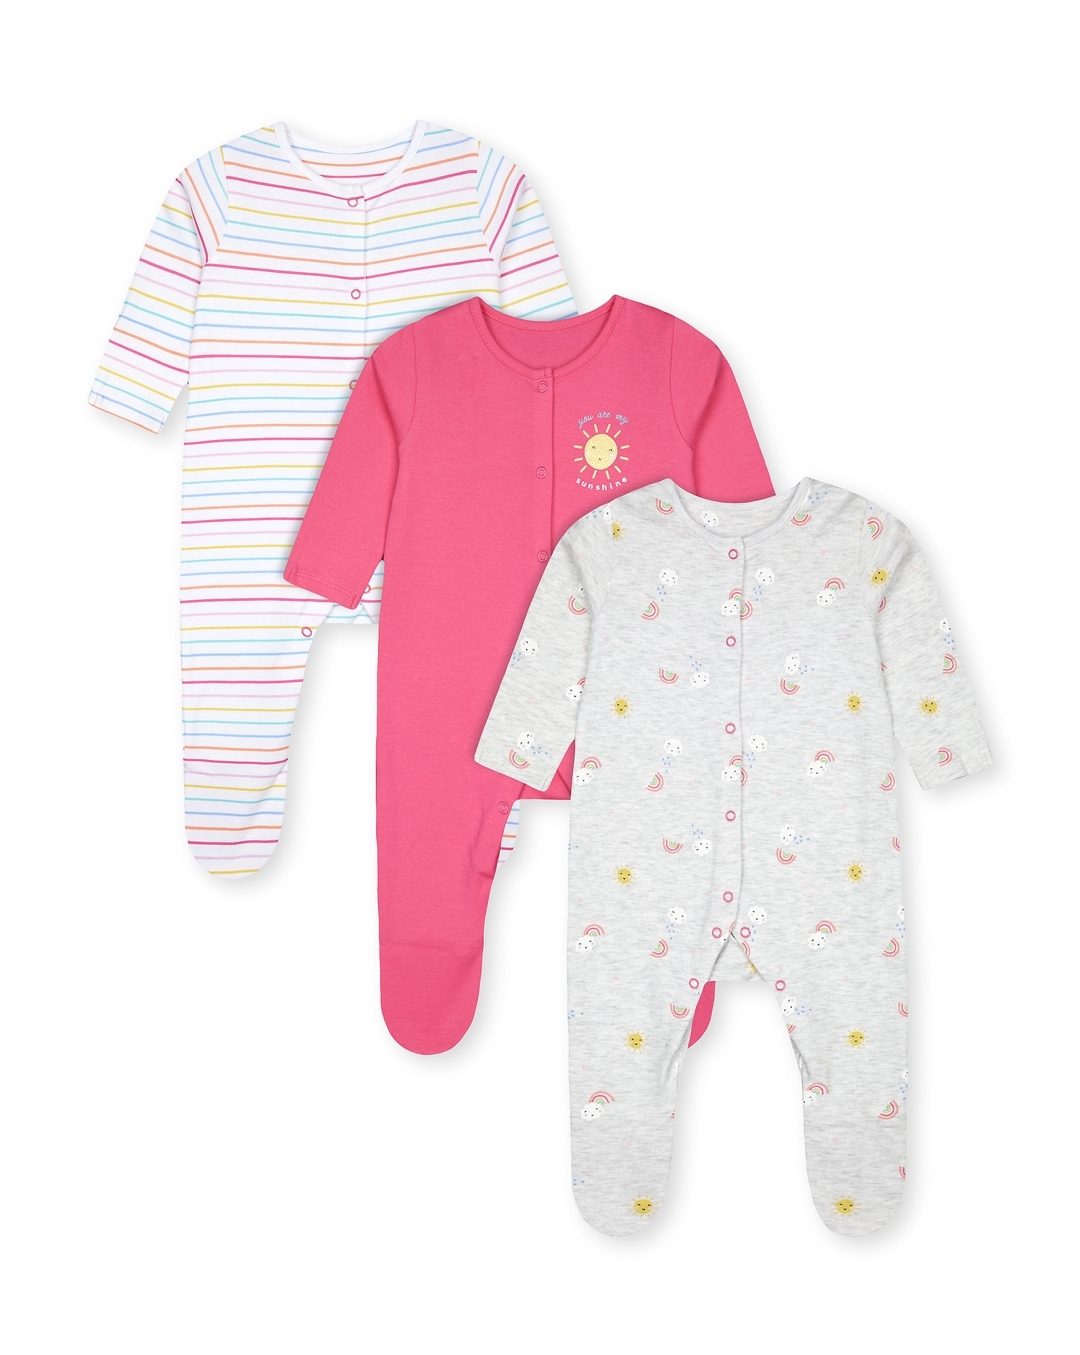 Buy Mothercare Baby Girls Rompers (Pack of 1), Off-White, 0M at Amazon.in